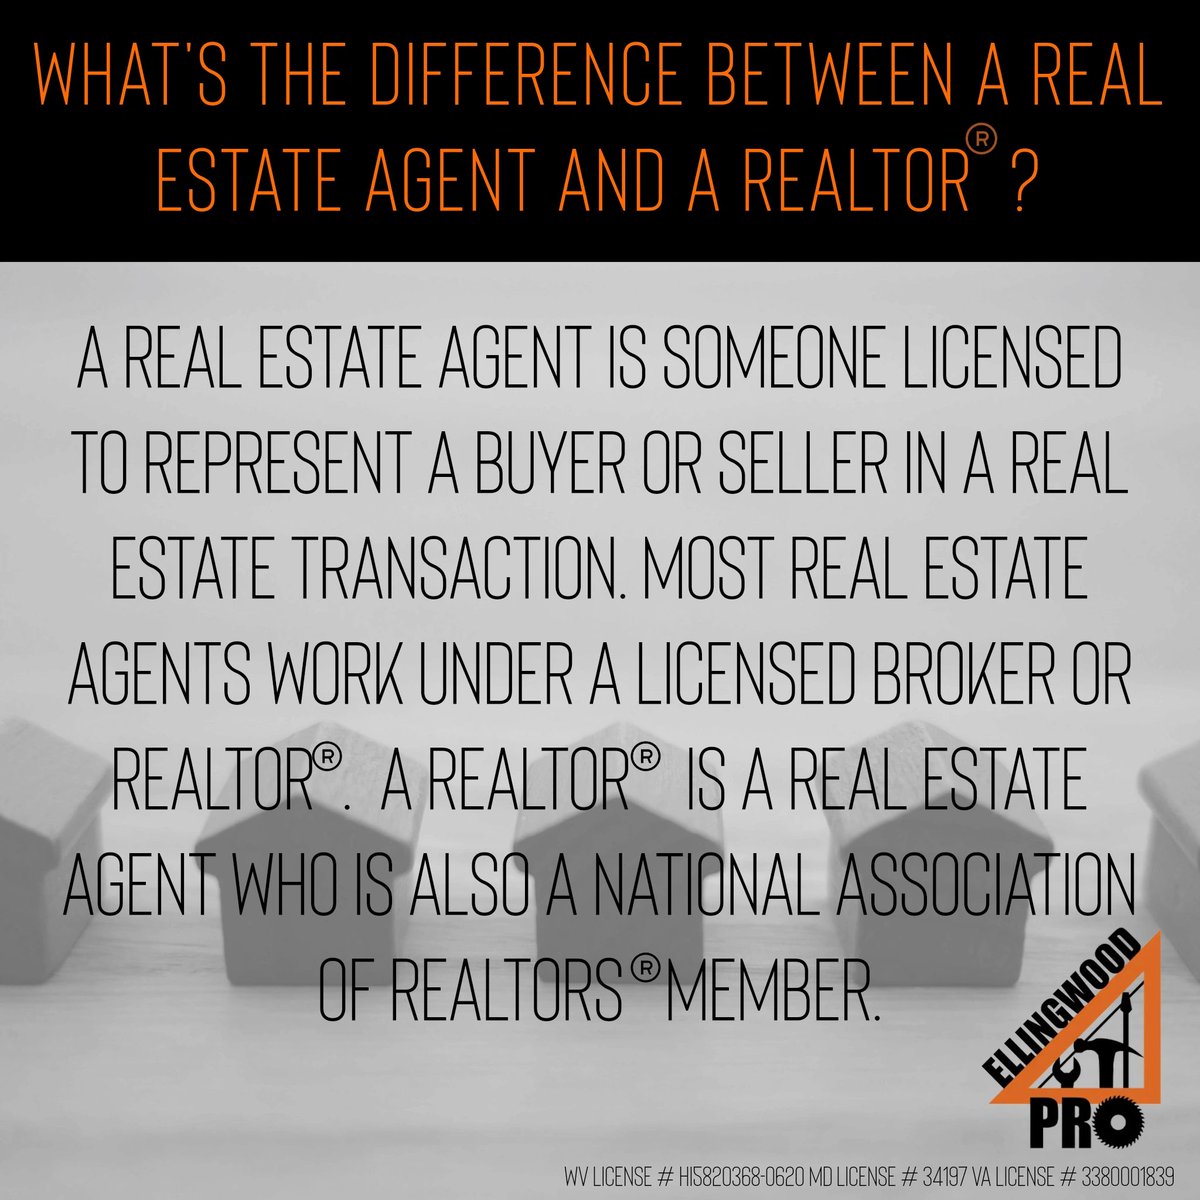 Did you know the difference between a real estate agent and a realtor? 

#inspectb4ubuy #realestateagent #realtor #wvrealestate #mdrealestate #varealestate #buyingandselling #inspector